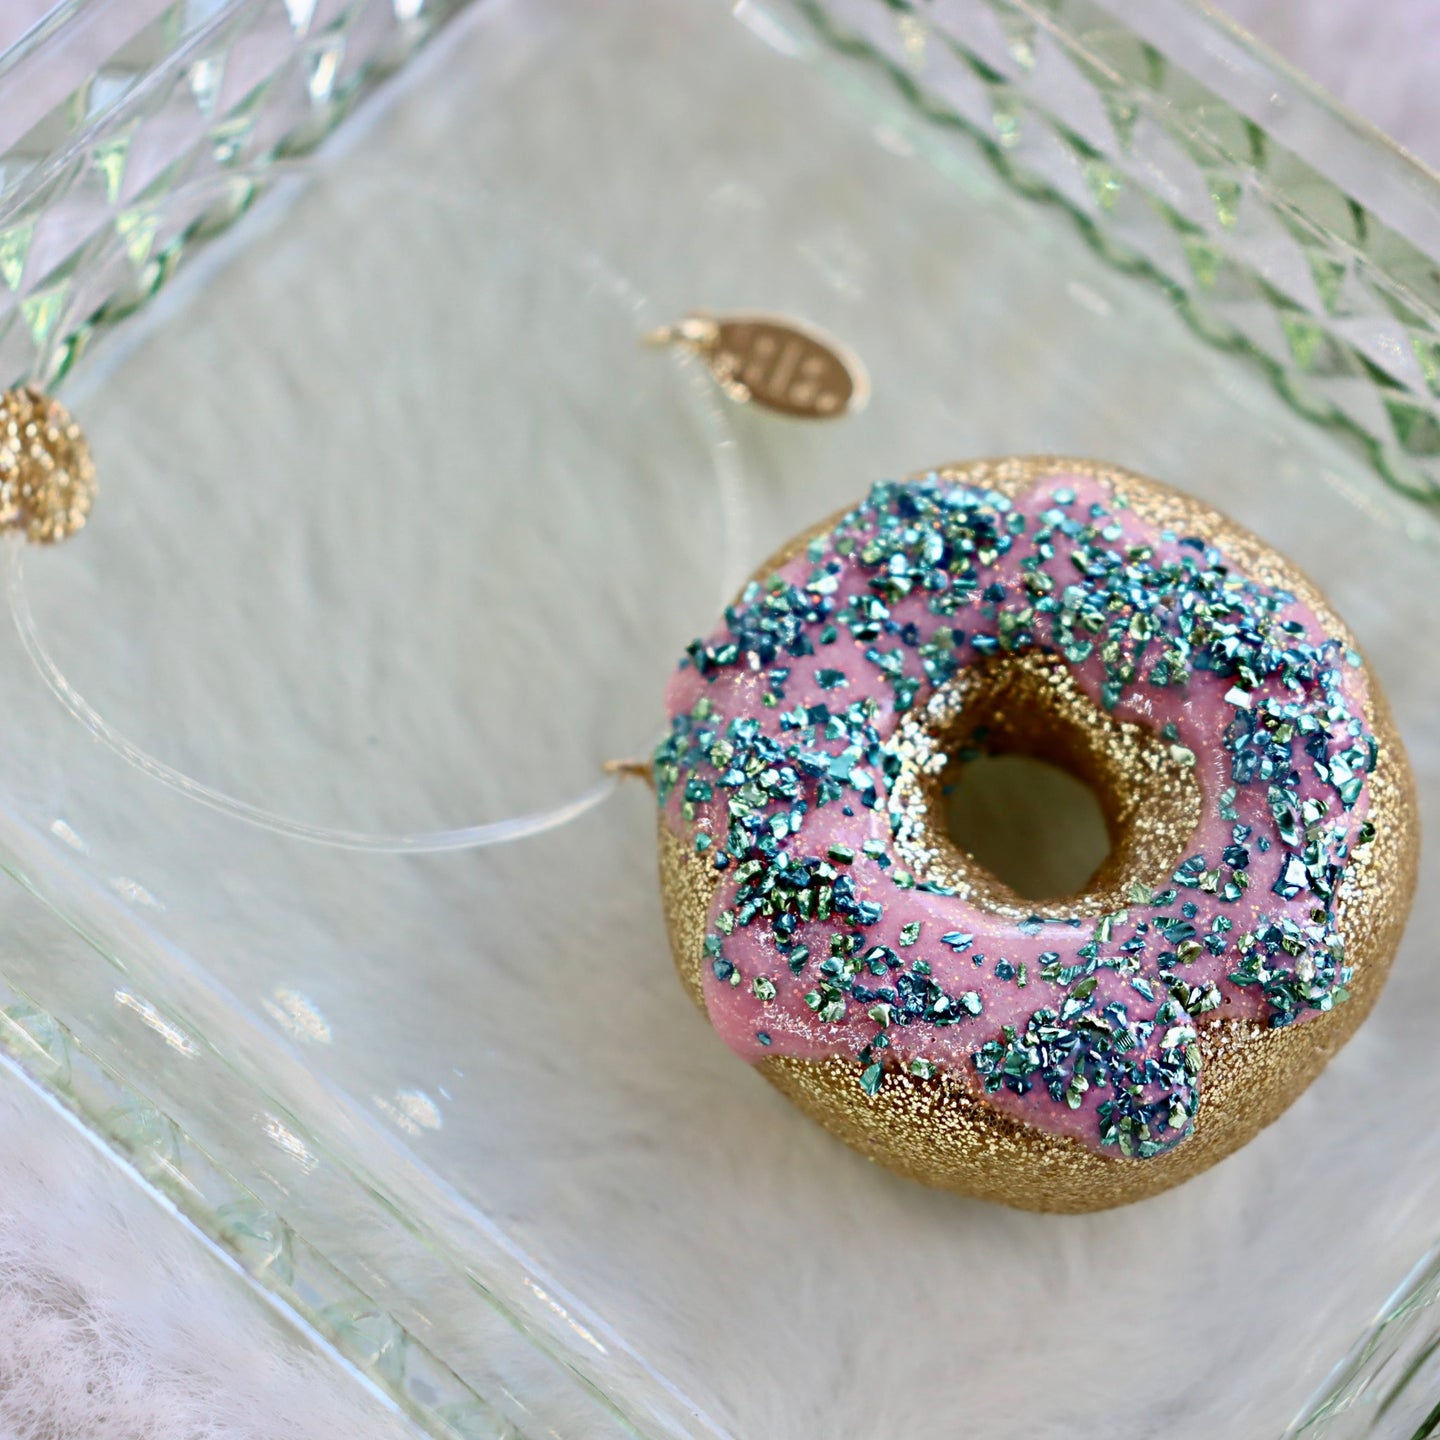 Delectable Donut Ornament